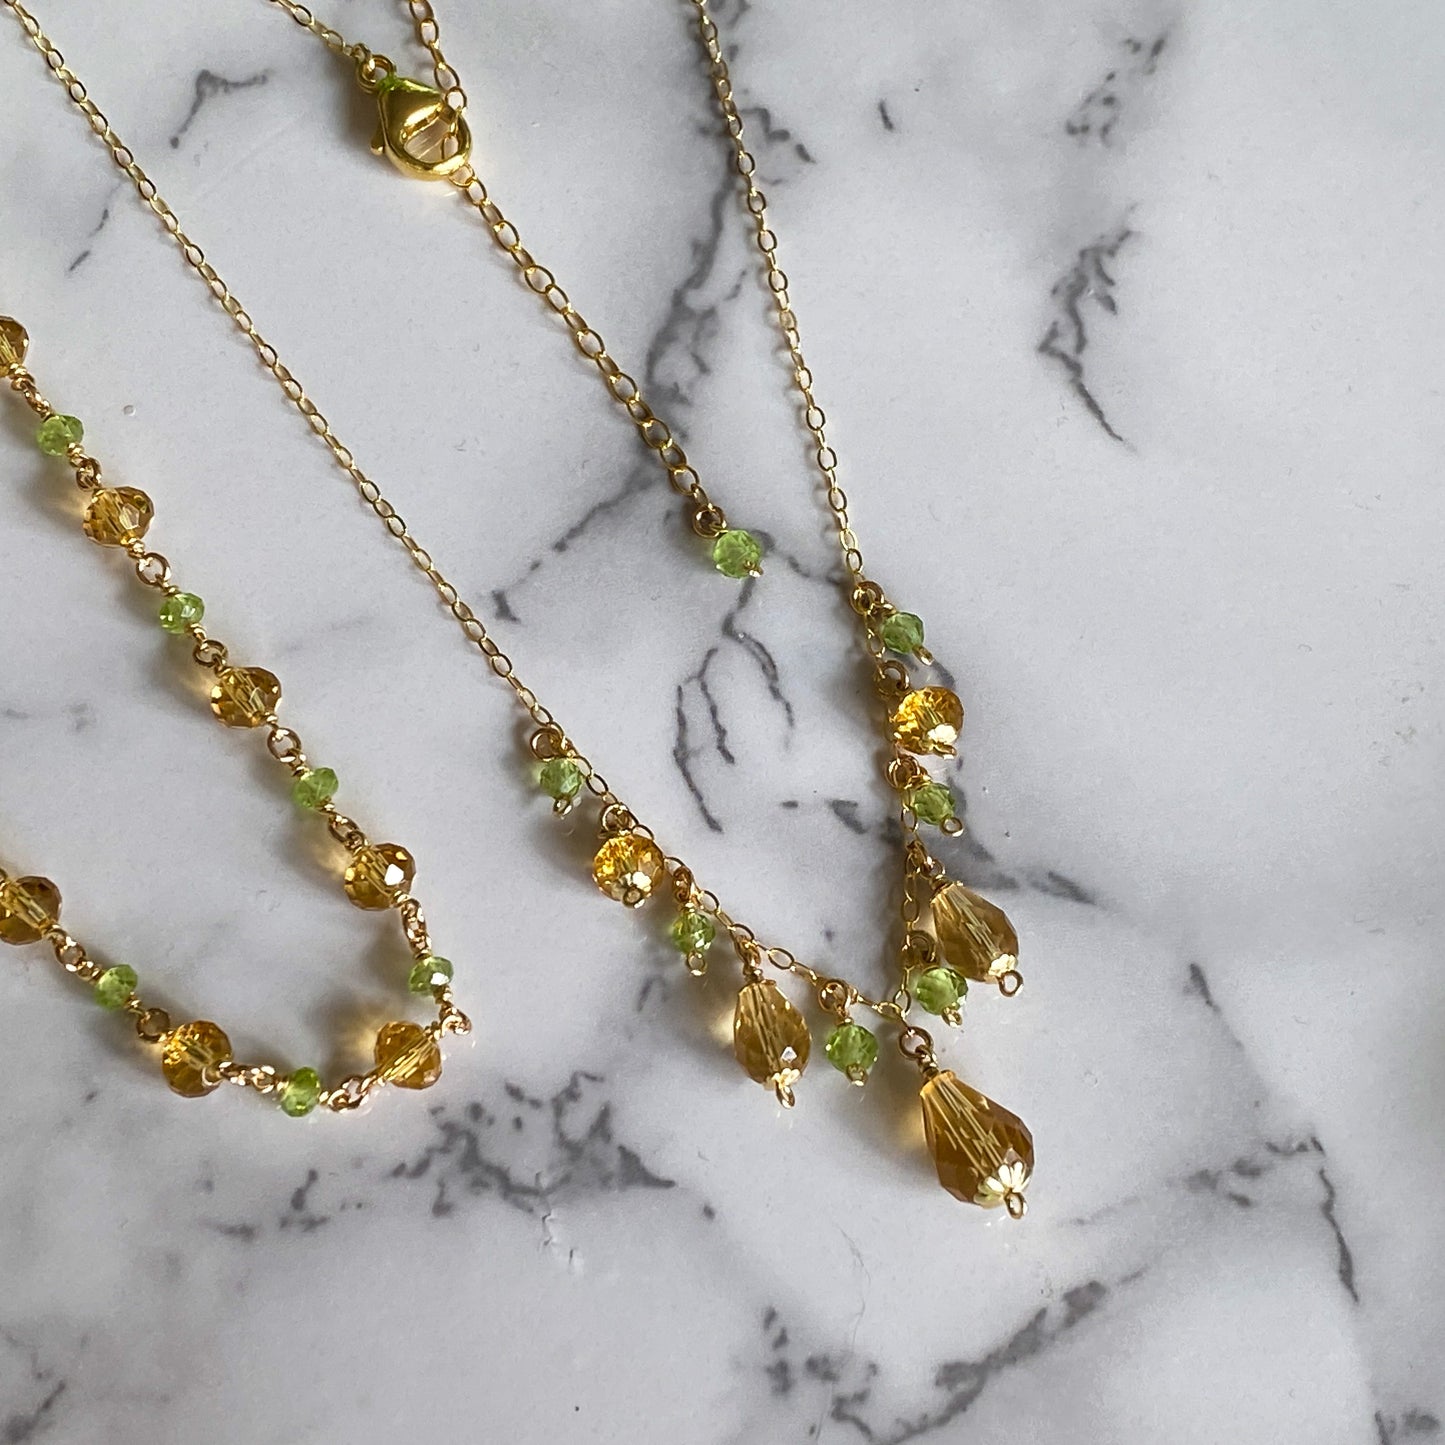 Fawn ~ Amber Glass, Peridot and 14k Gold Filled Dainty Charm Necklace